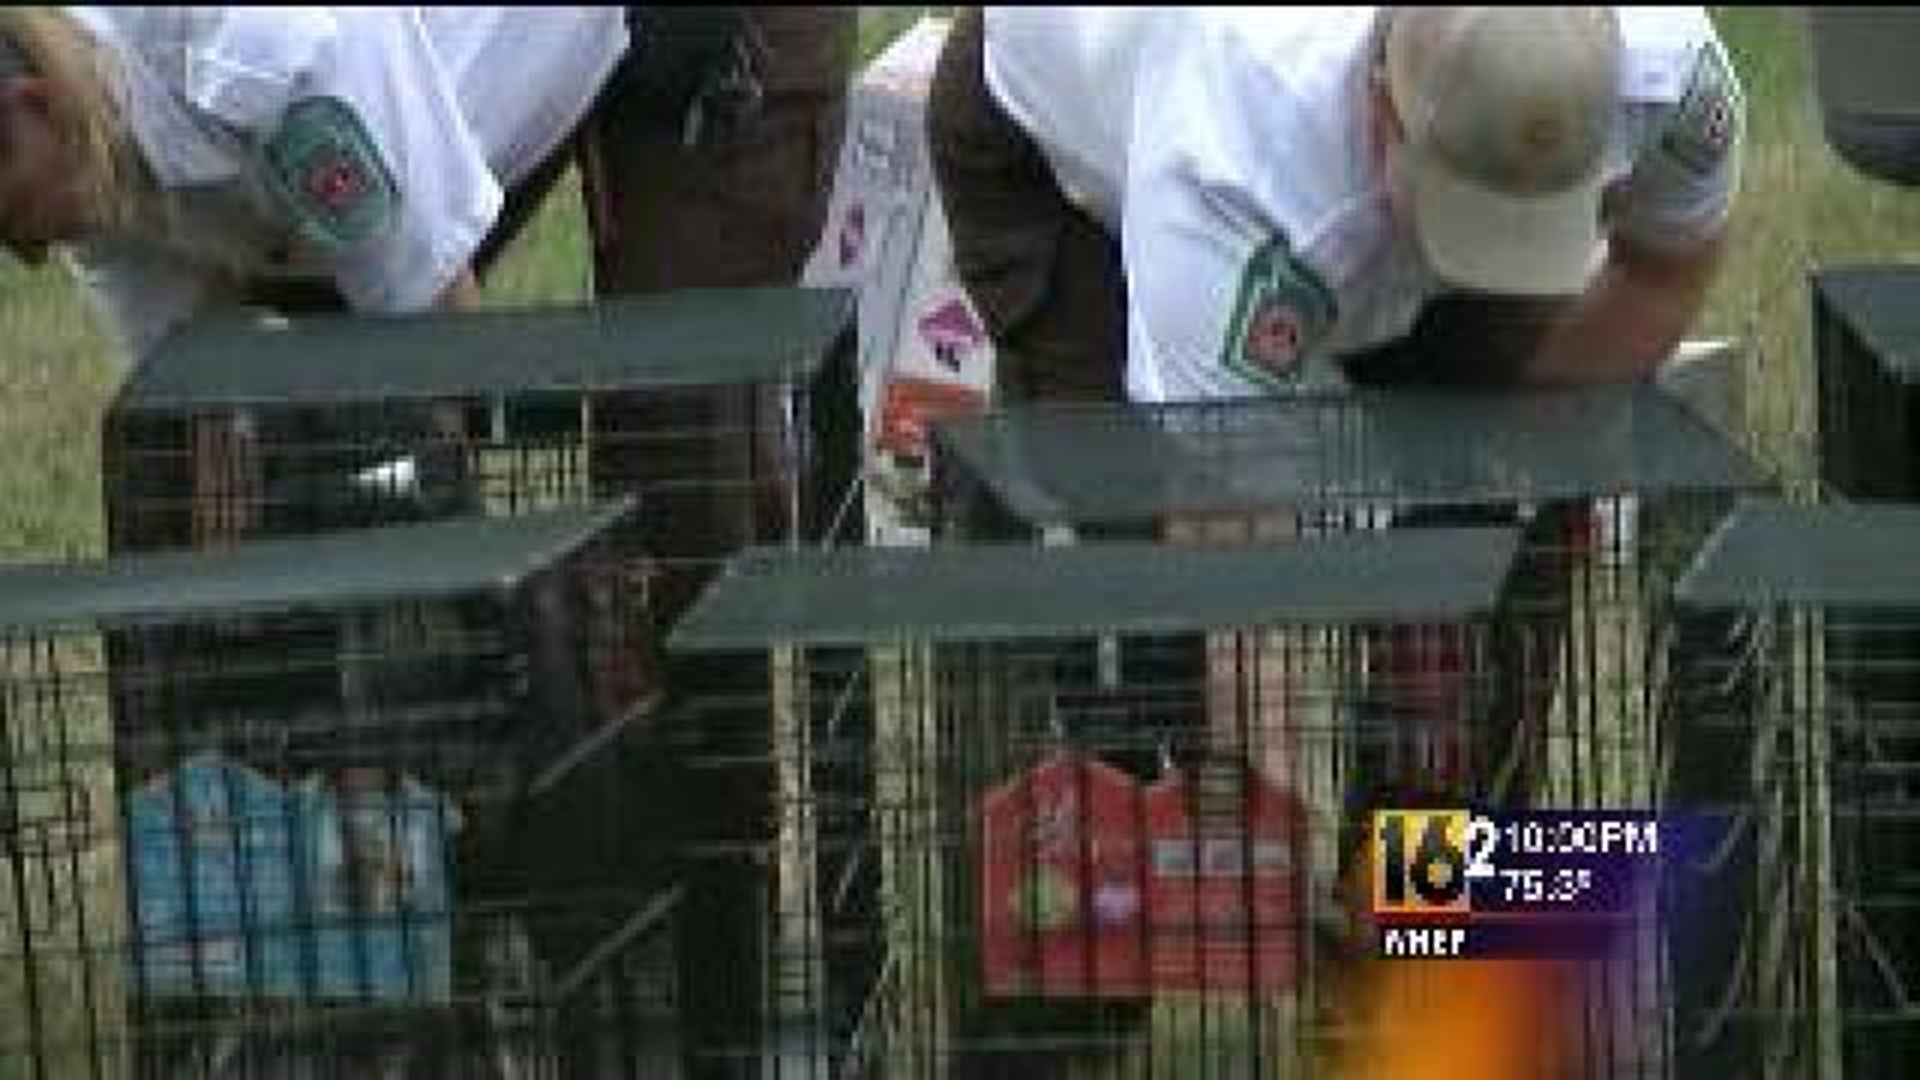 State Wardens Seize More Than 200 Dogs From Home